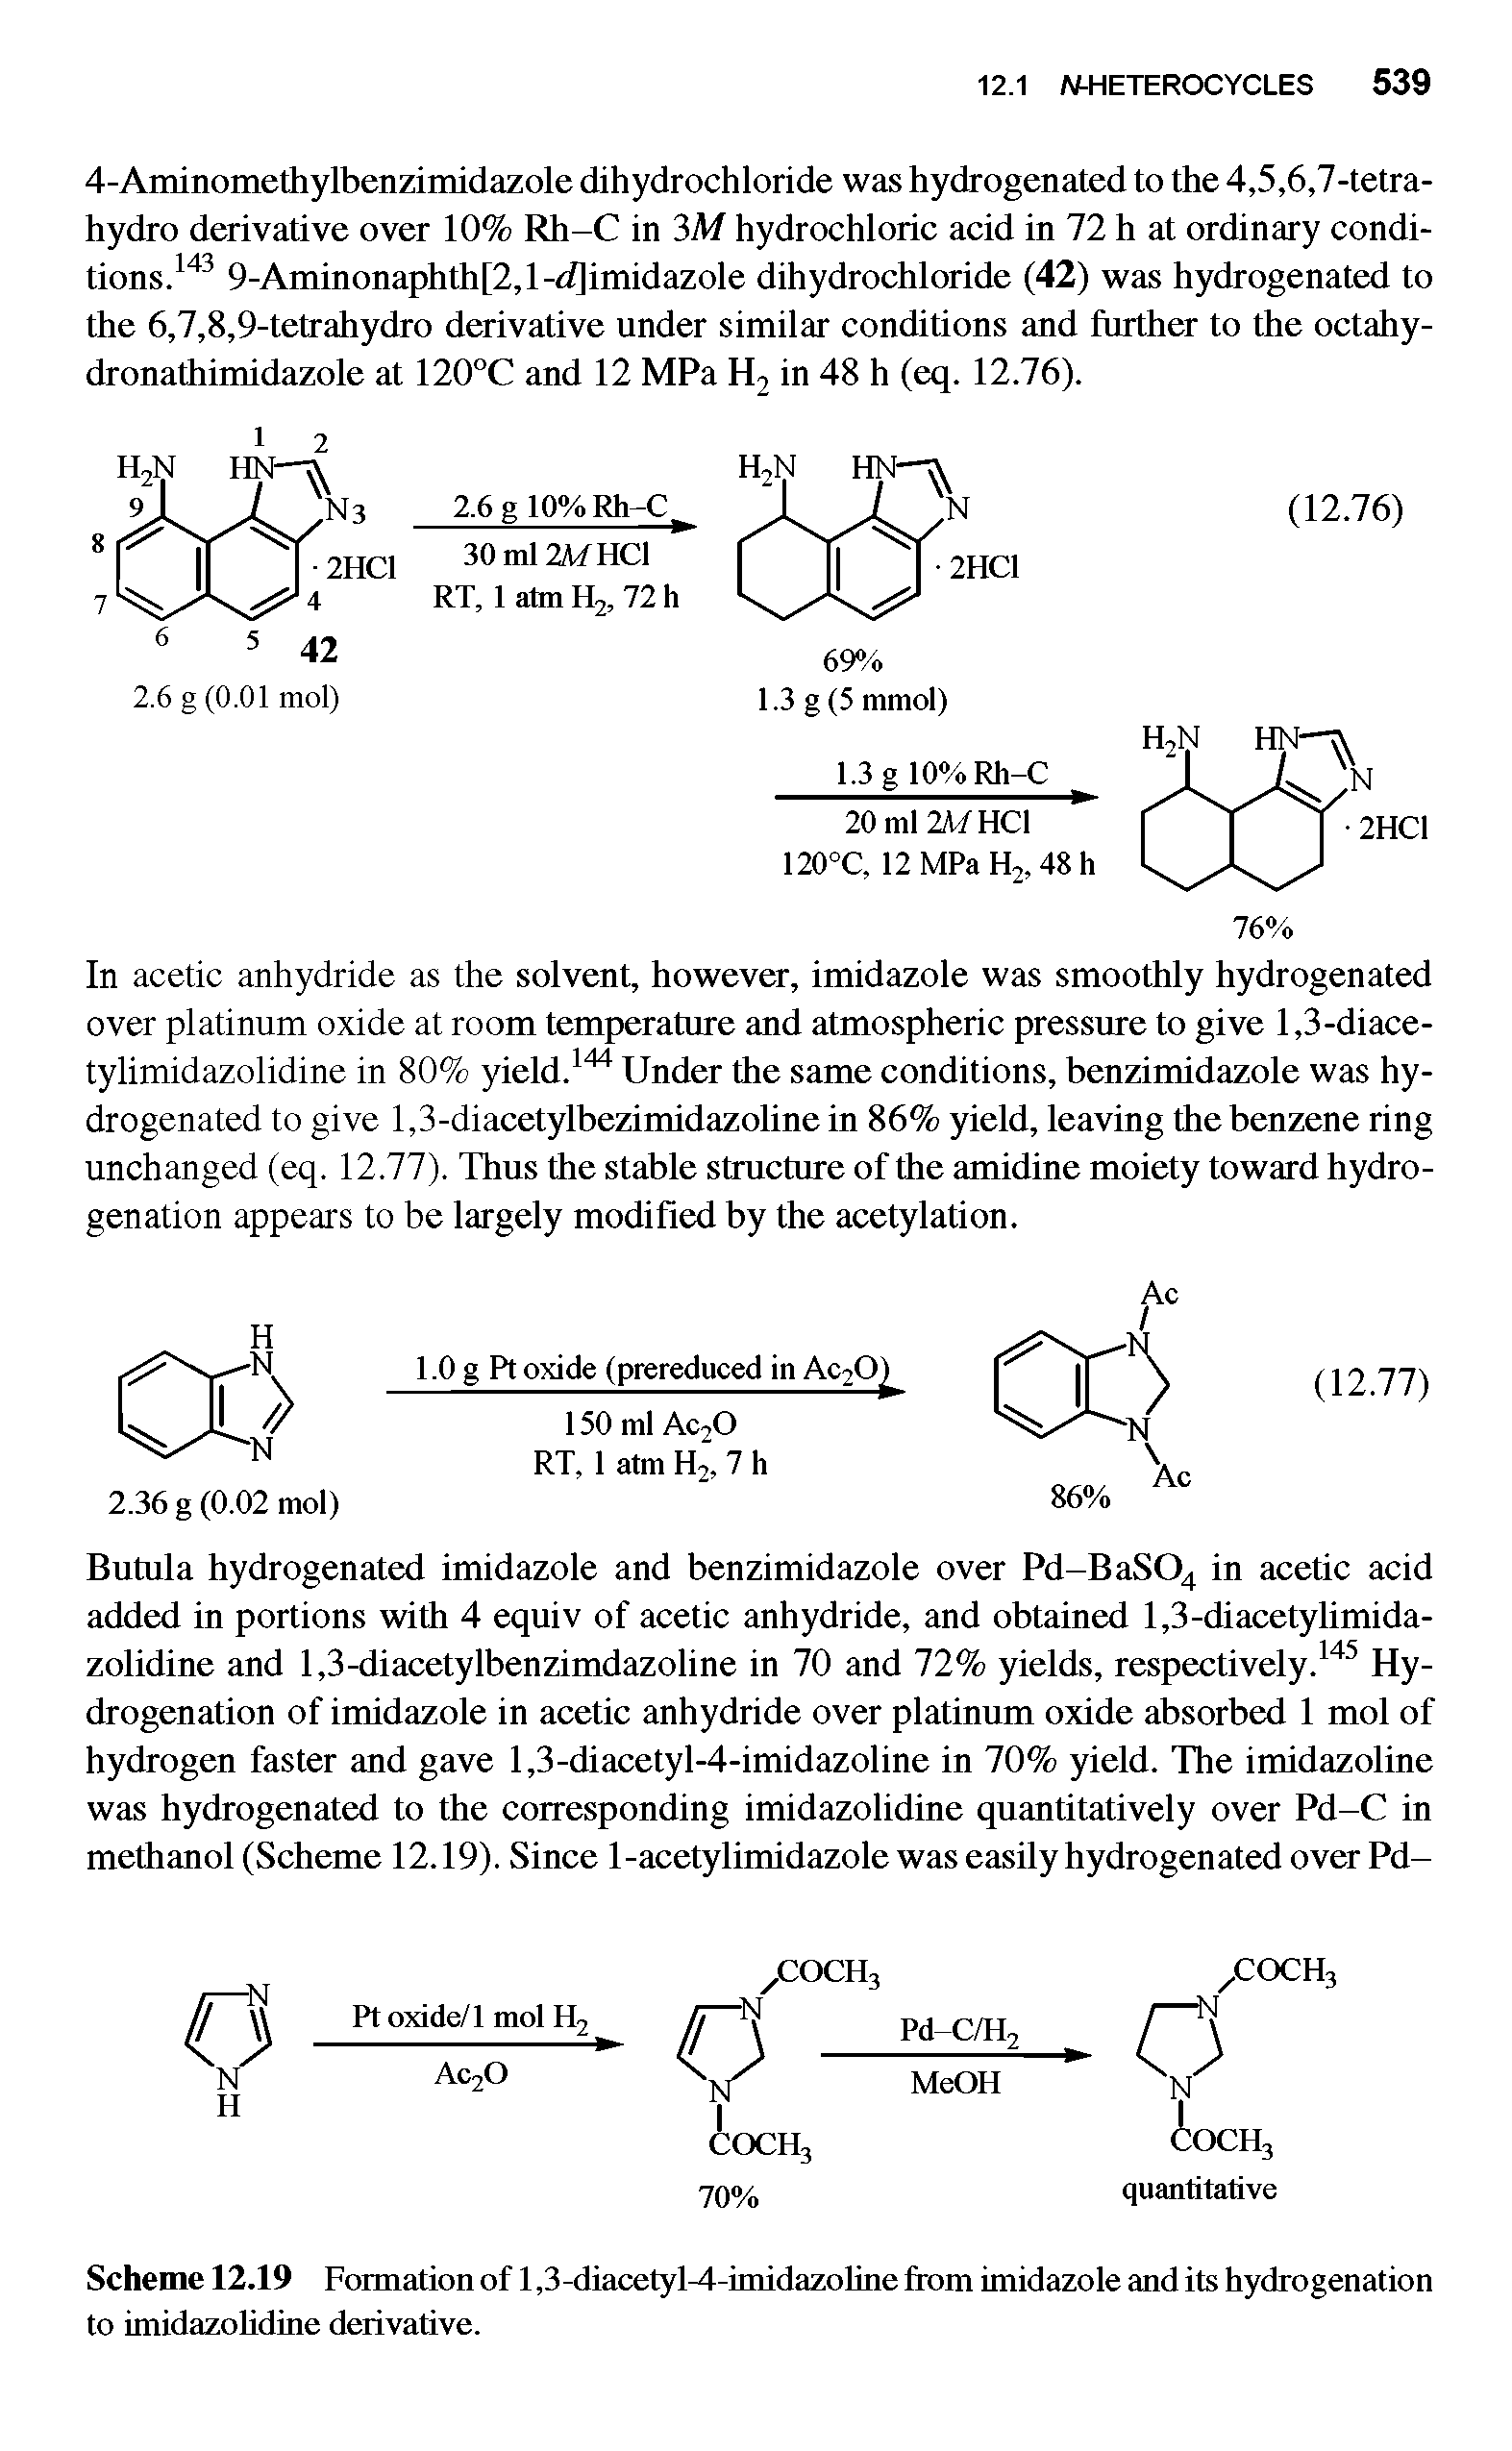 Scheme 12.19 Formation of 1,3-d iacety 1-4-i m ida/.oline from imidazole and its hydrogenation to imidazolidine derivative.